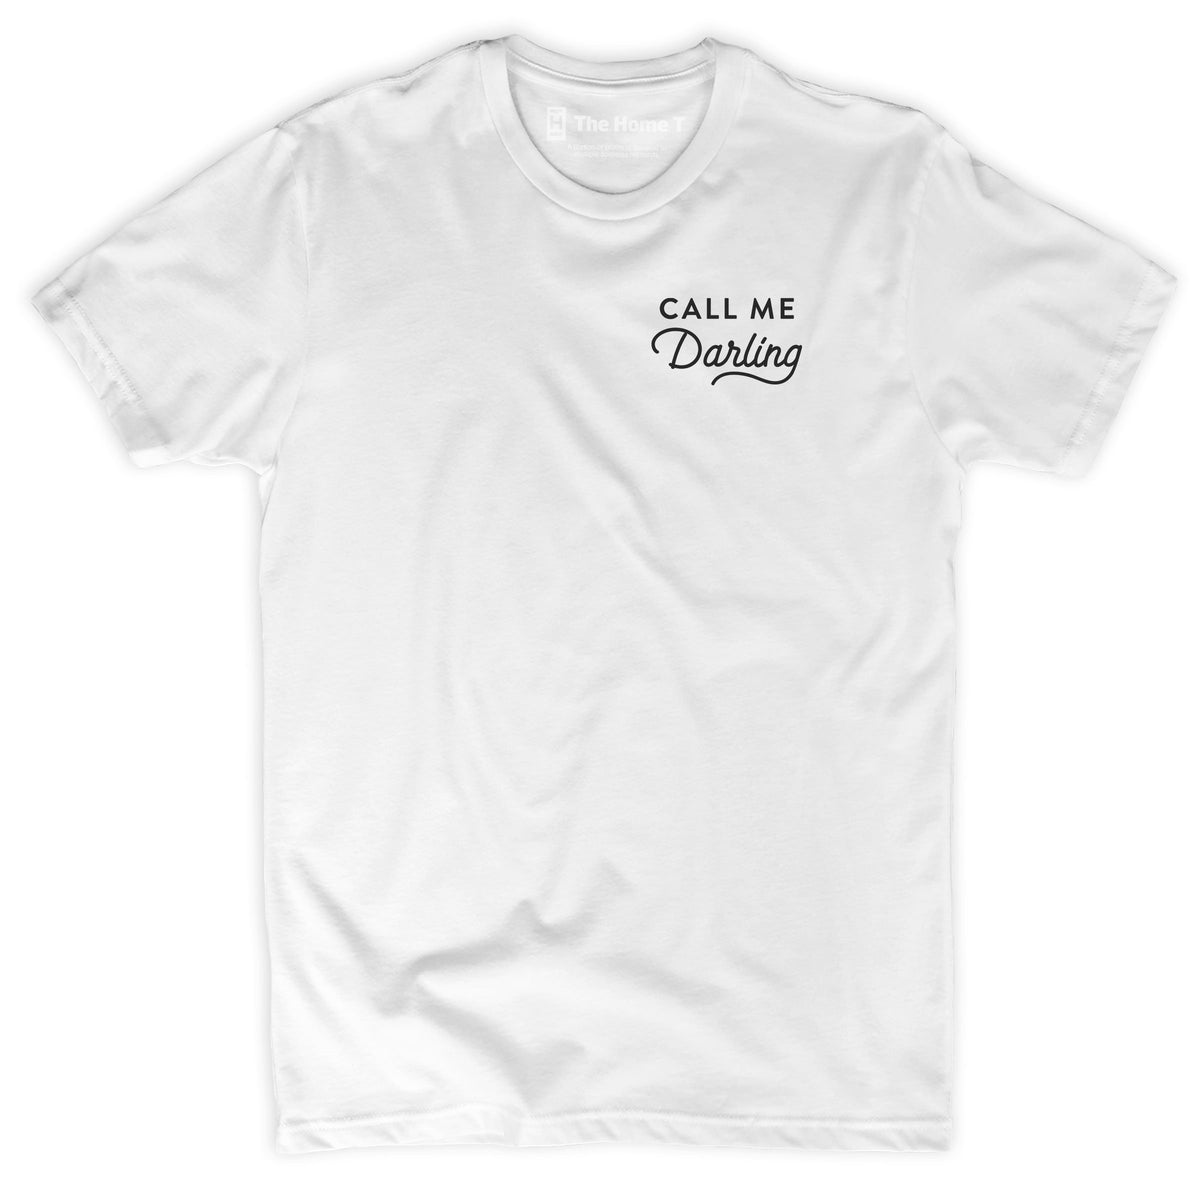 Call Me Darling Crew neck The Home T XS